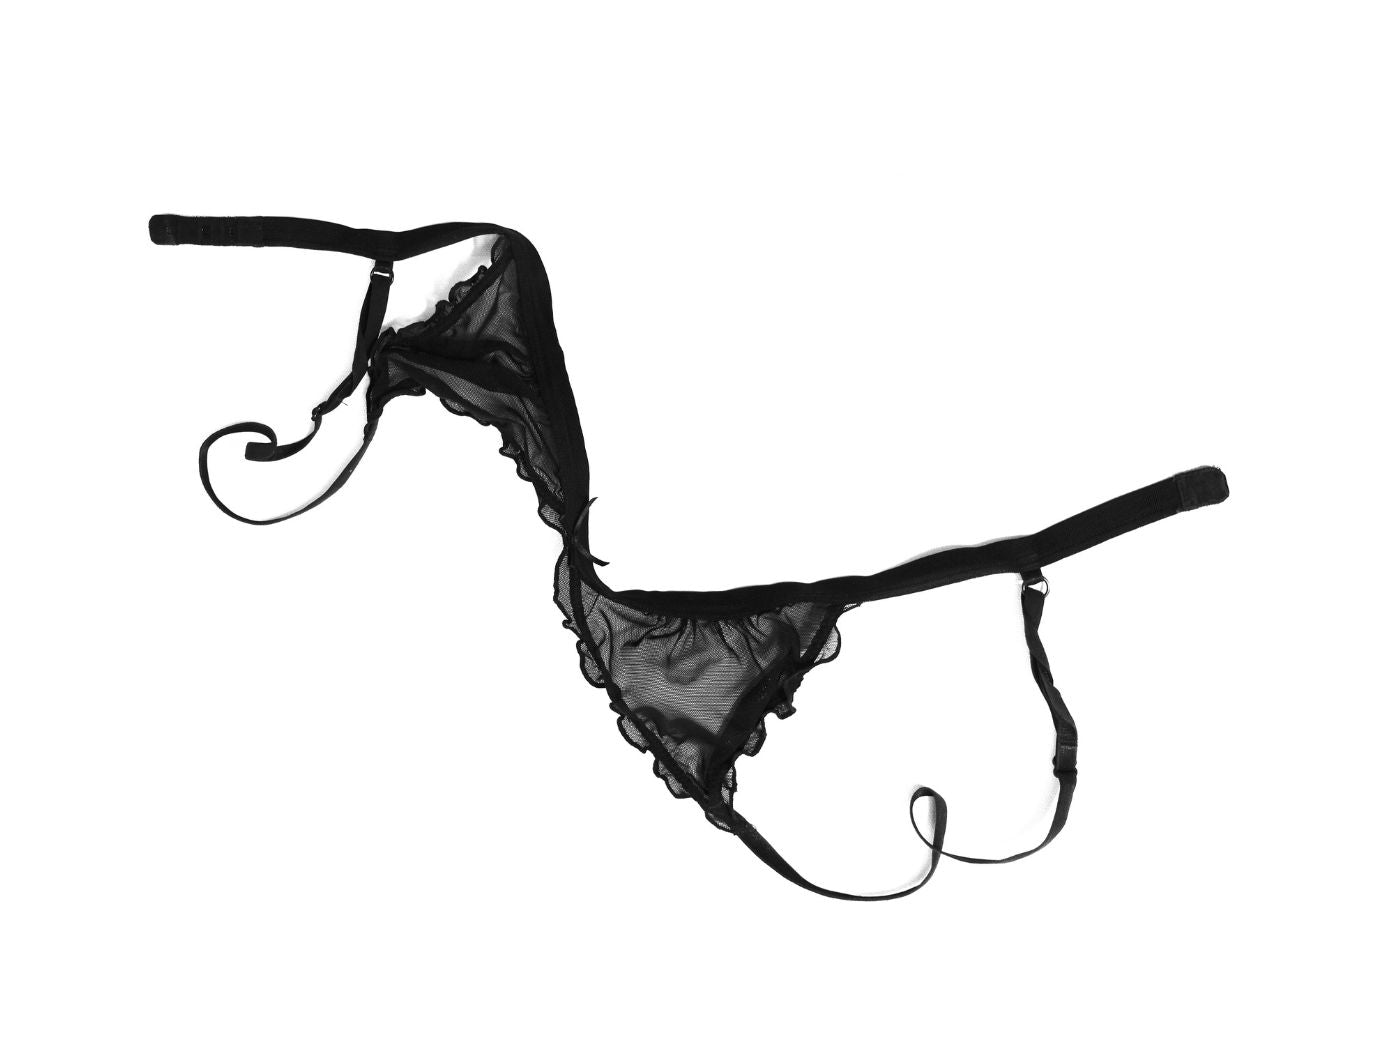 30 Types of Bra: Different Styles of Bras You Should Know